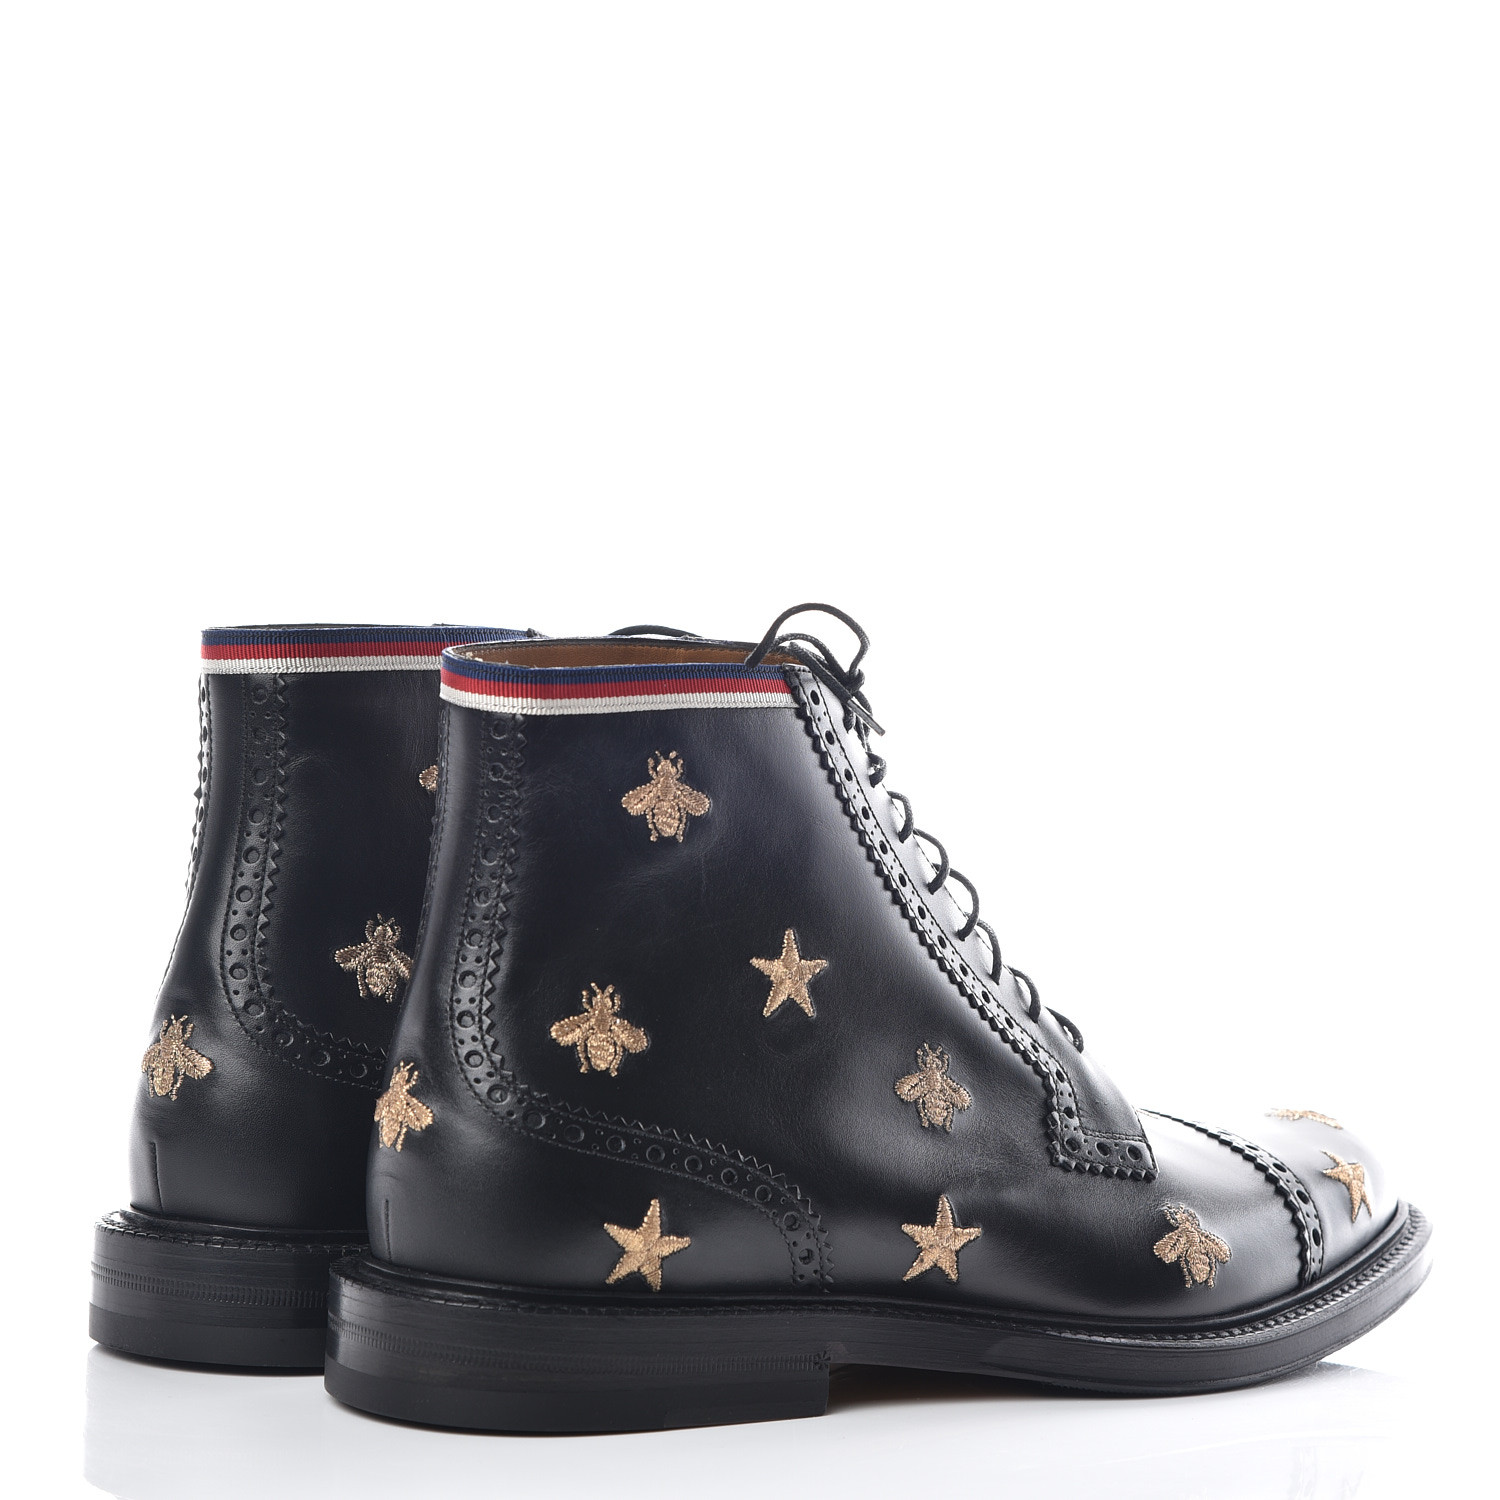 GUCCI Calfskin Embroidered Bee Star Mens Brogue Boots 8 Black 407336